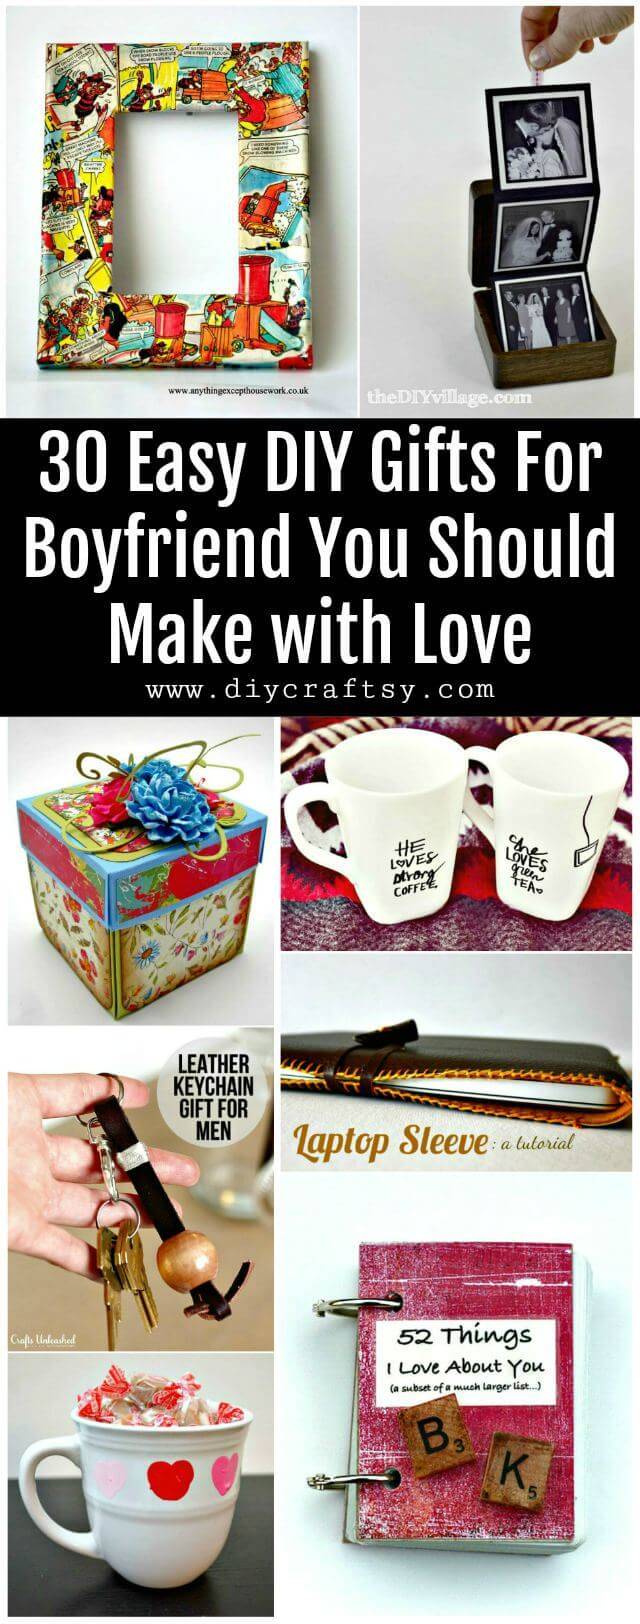 30 Easy DIY Gifts For Boyfriend You Should Make with Love ...